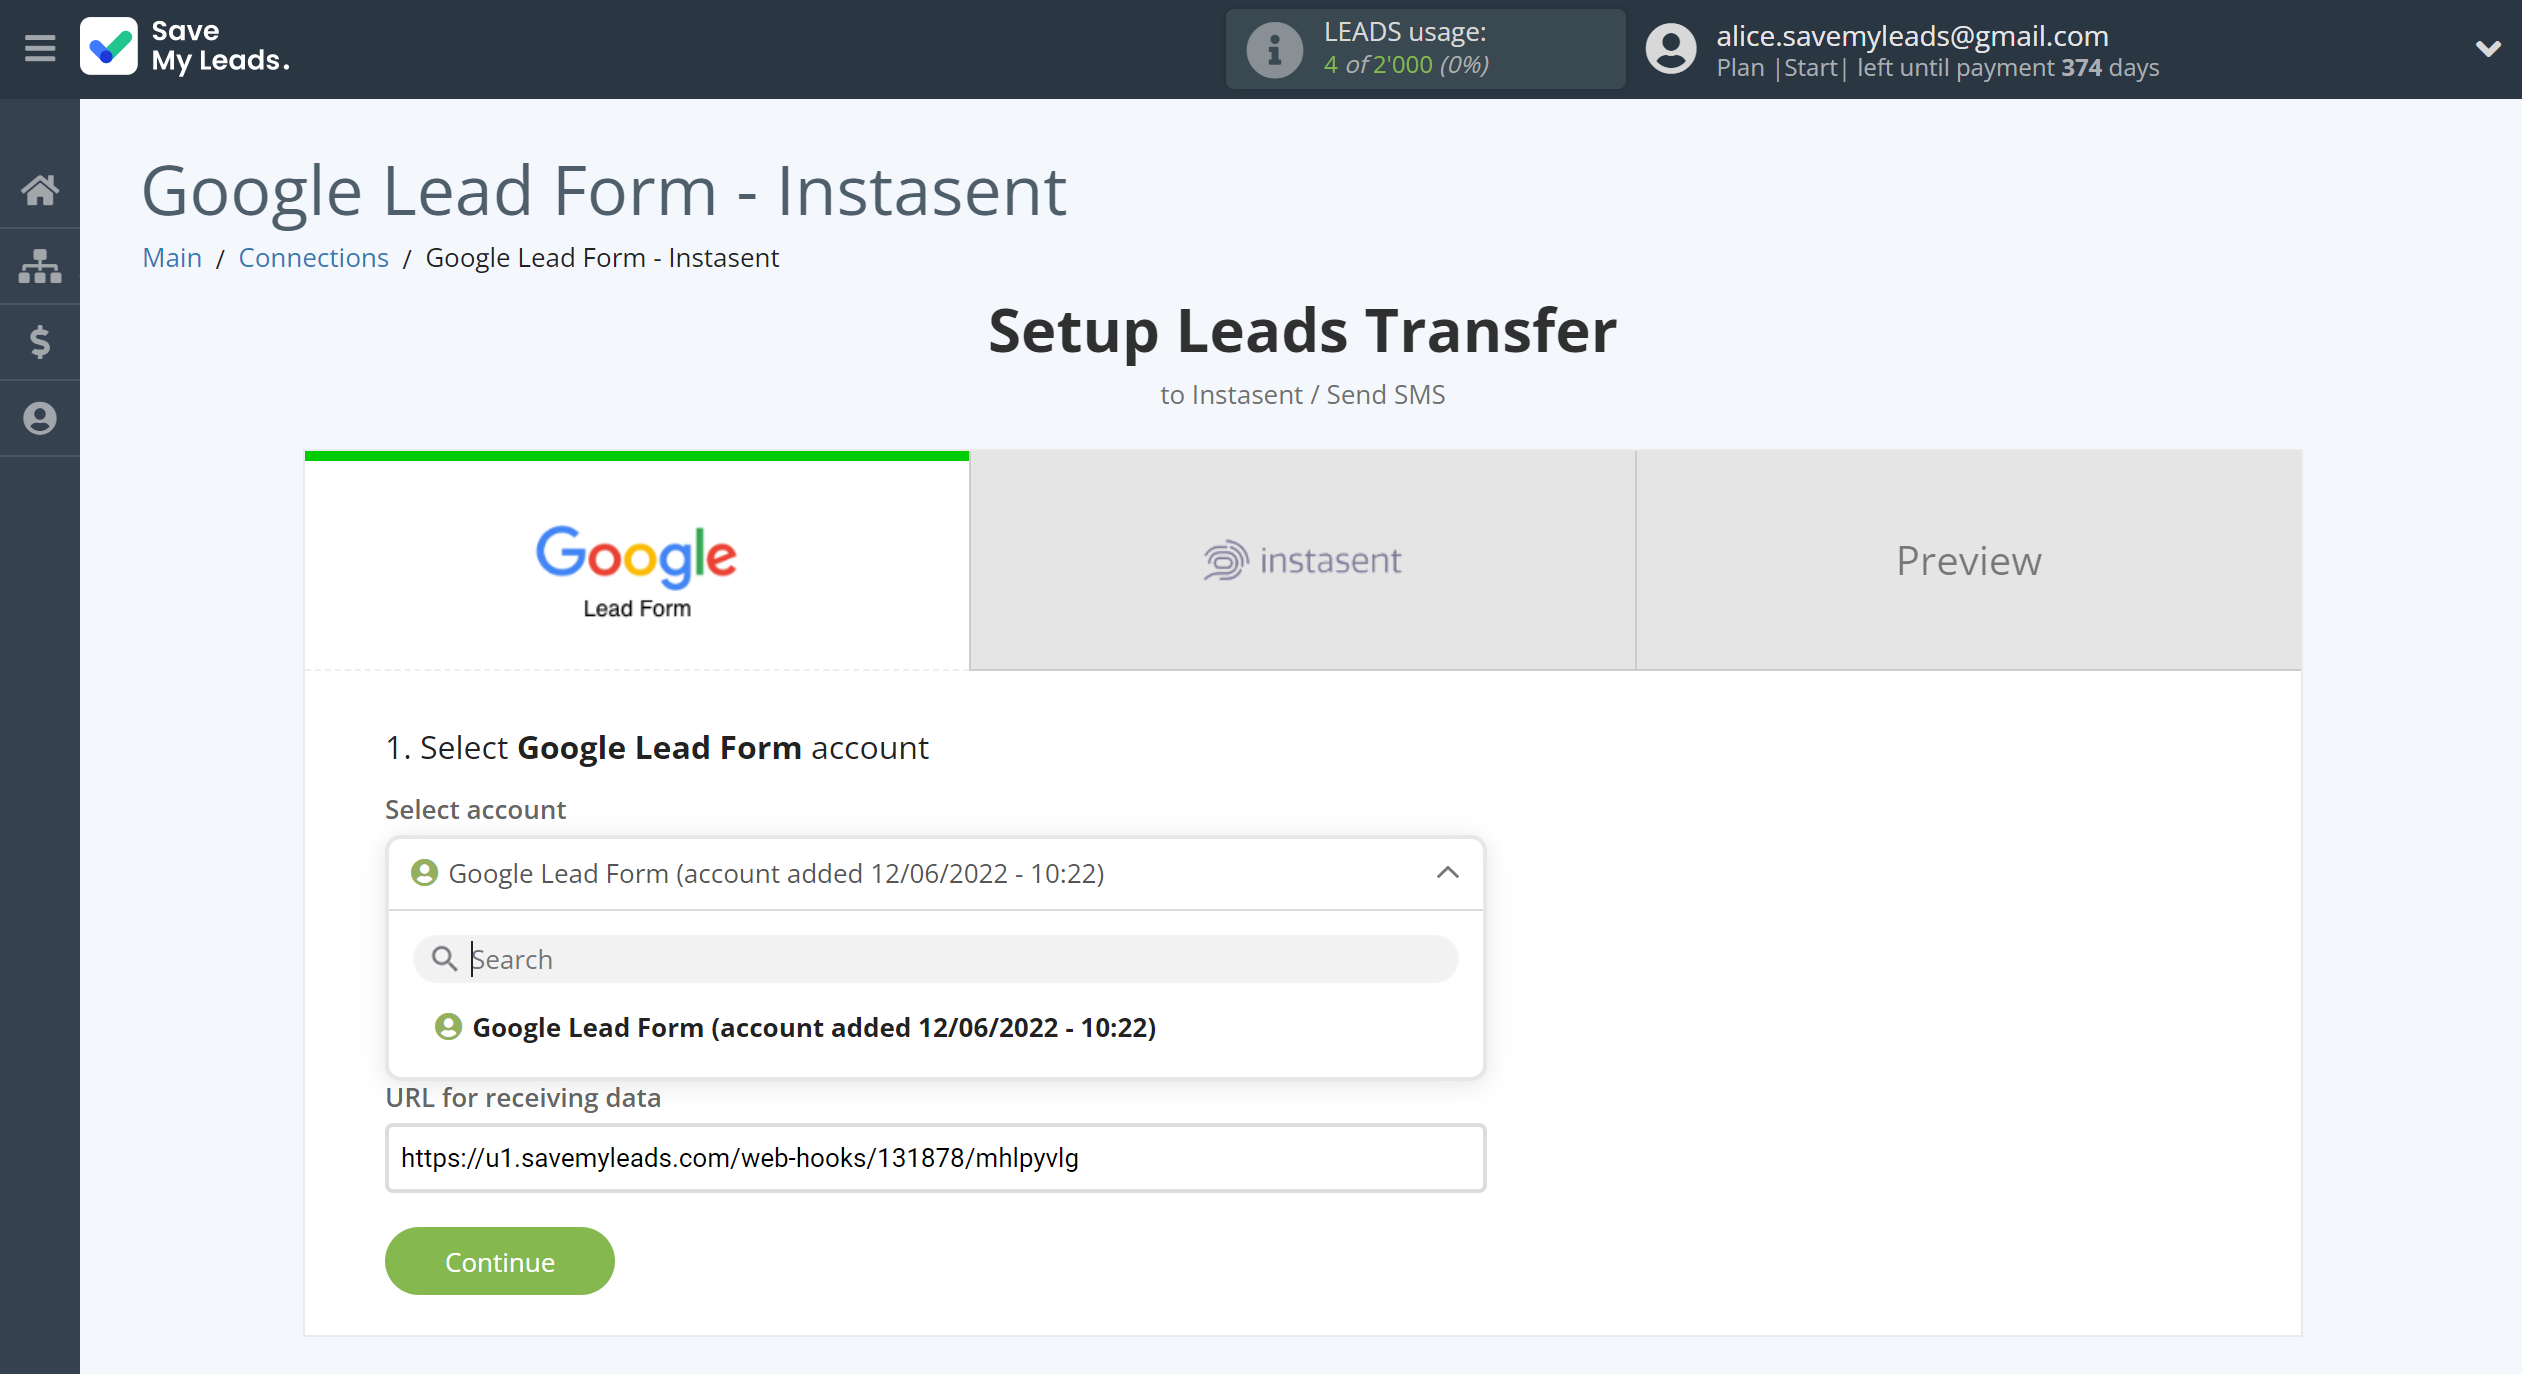 How to Connect Google Lead Form with Instasent | Data Source account selection